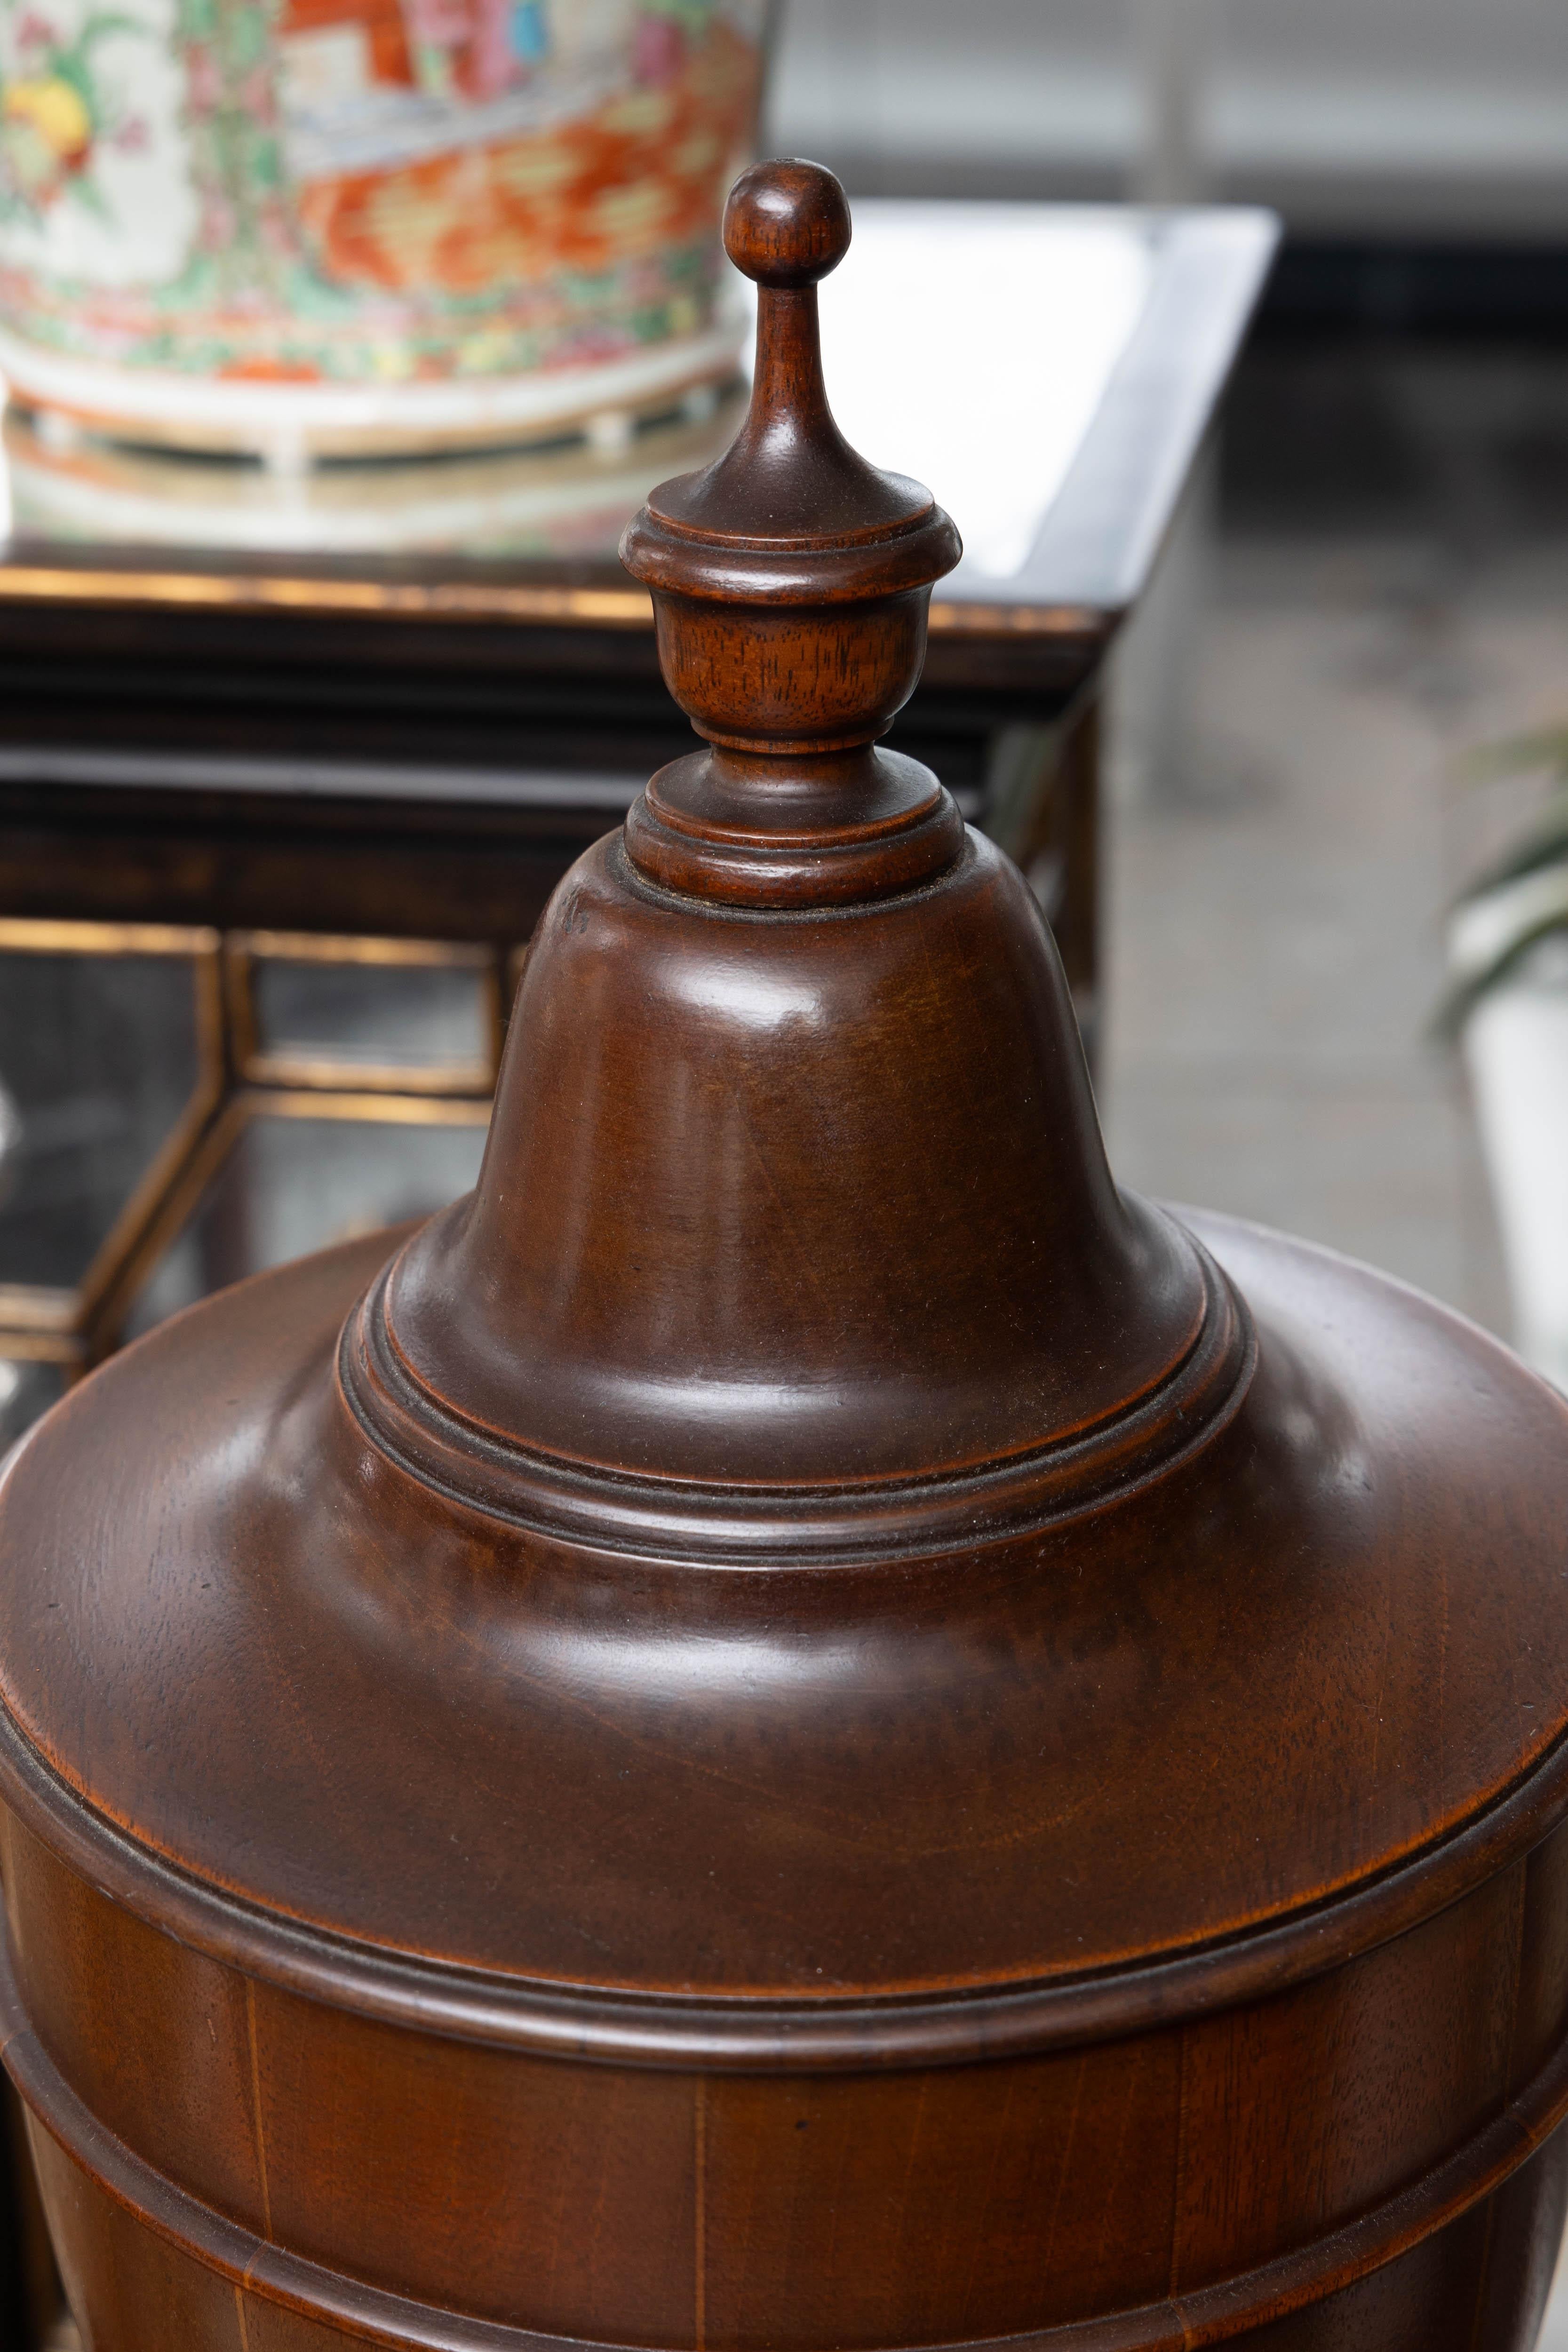 Woodwork Mahogany George III Style Cutlery Urns - Pair available, priced individually. For Sale